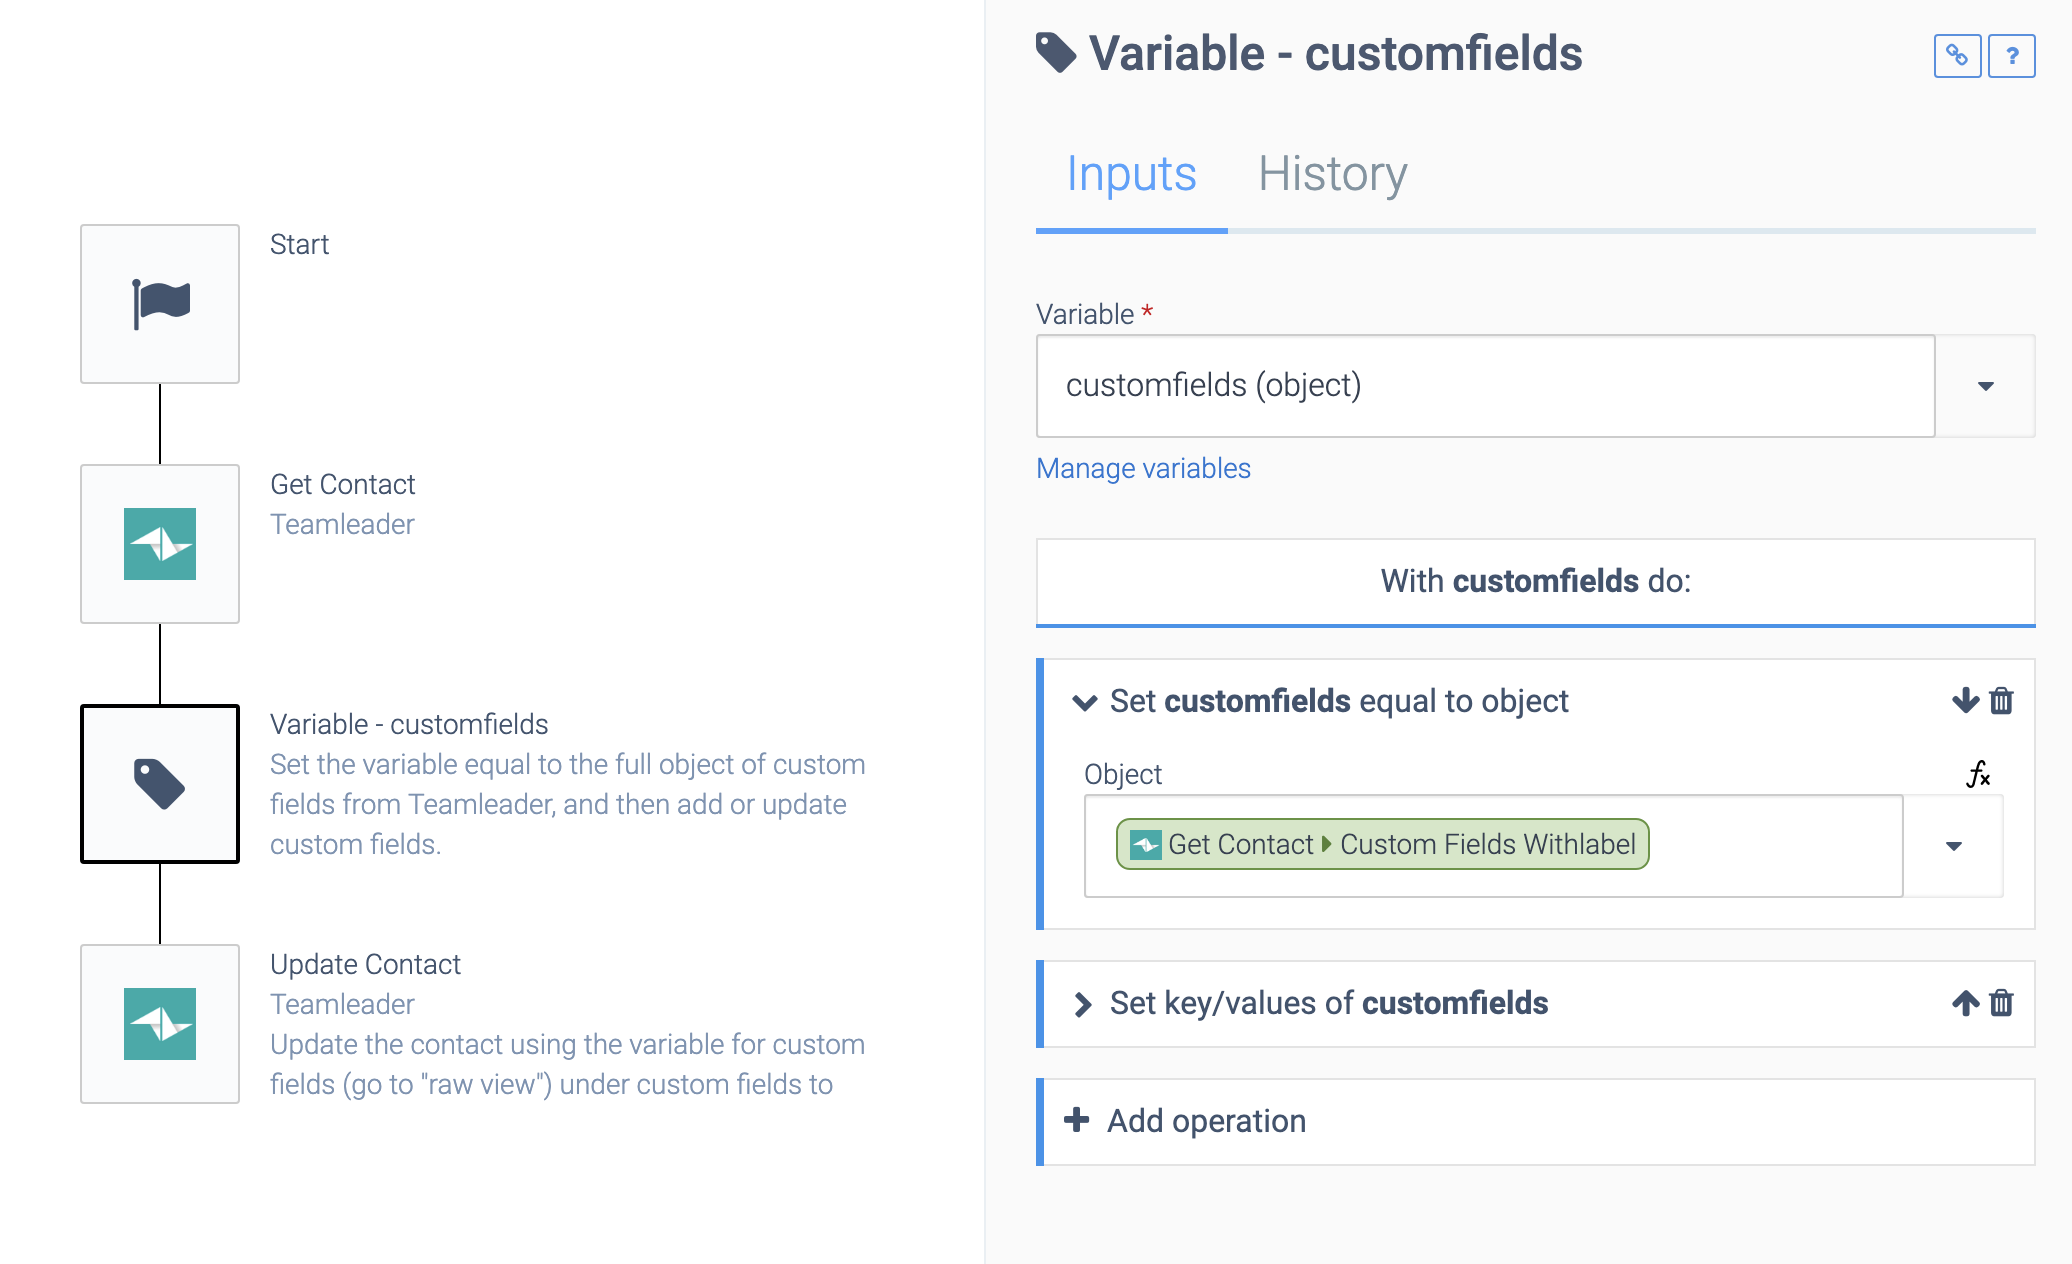 an automation consisting of a Start block, a Get Contact b lock, a Variable: customfields block, and an Update Contact block. The Variable block is selected. The object customfields is set to equal the object Get Contact > Custom Fields Withlabel.